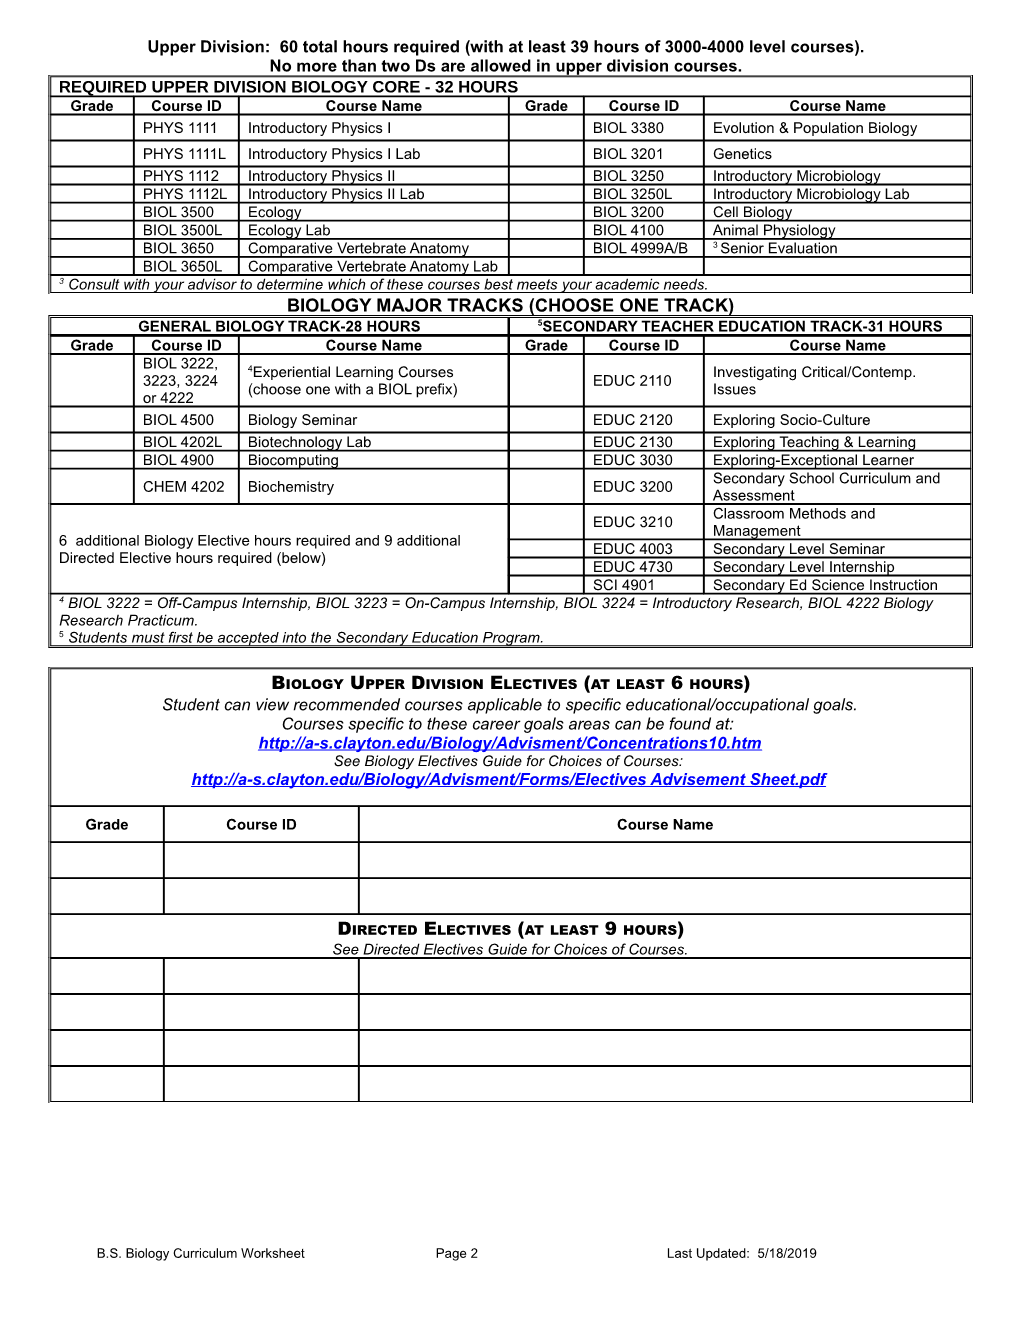 B.S. Biology Curriculum Worksheetpage 1Last Updated: 5/18/2019